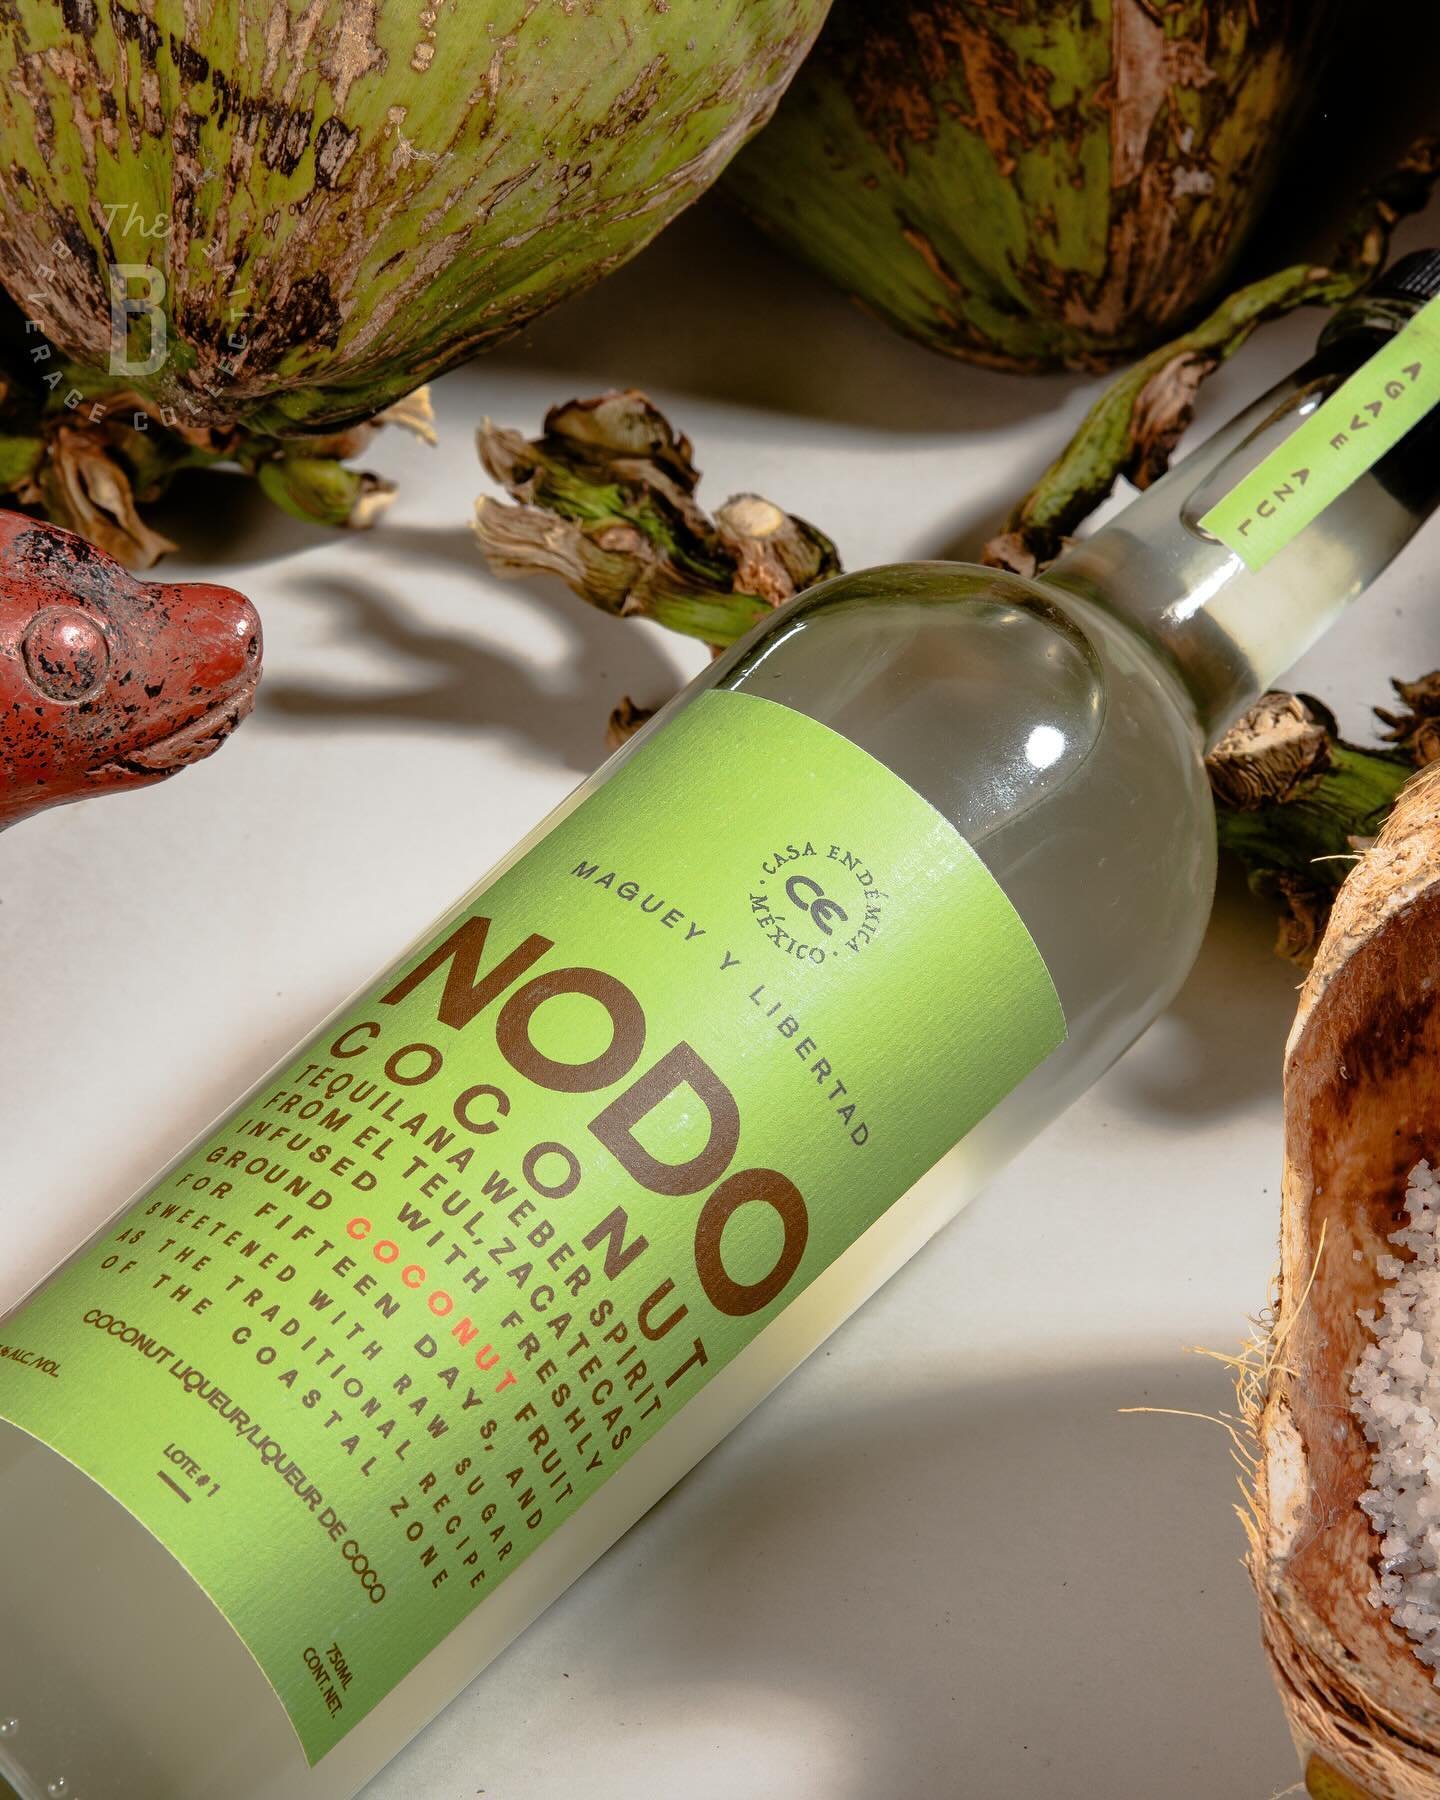 Transport yourself to the sunny beaches of Mexico with every sip of NODO Coconut &ndash;crafted with Blue Weber Agave Spirit, real coconuts, water, and raw cane sugar sourced from Colima. 🇲🇽 ☀️🌴

How do you enjoy yours: shots, sipping, or in a del